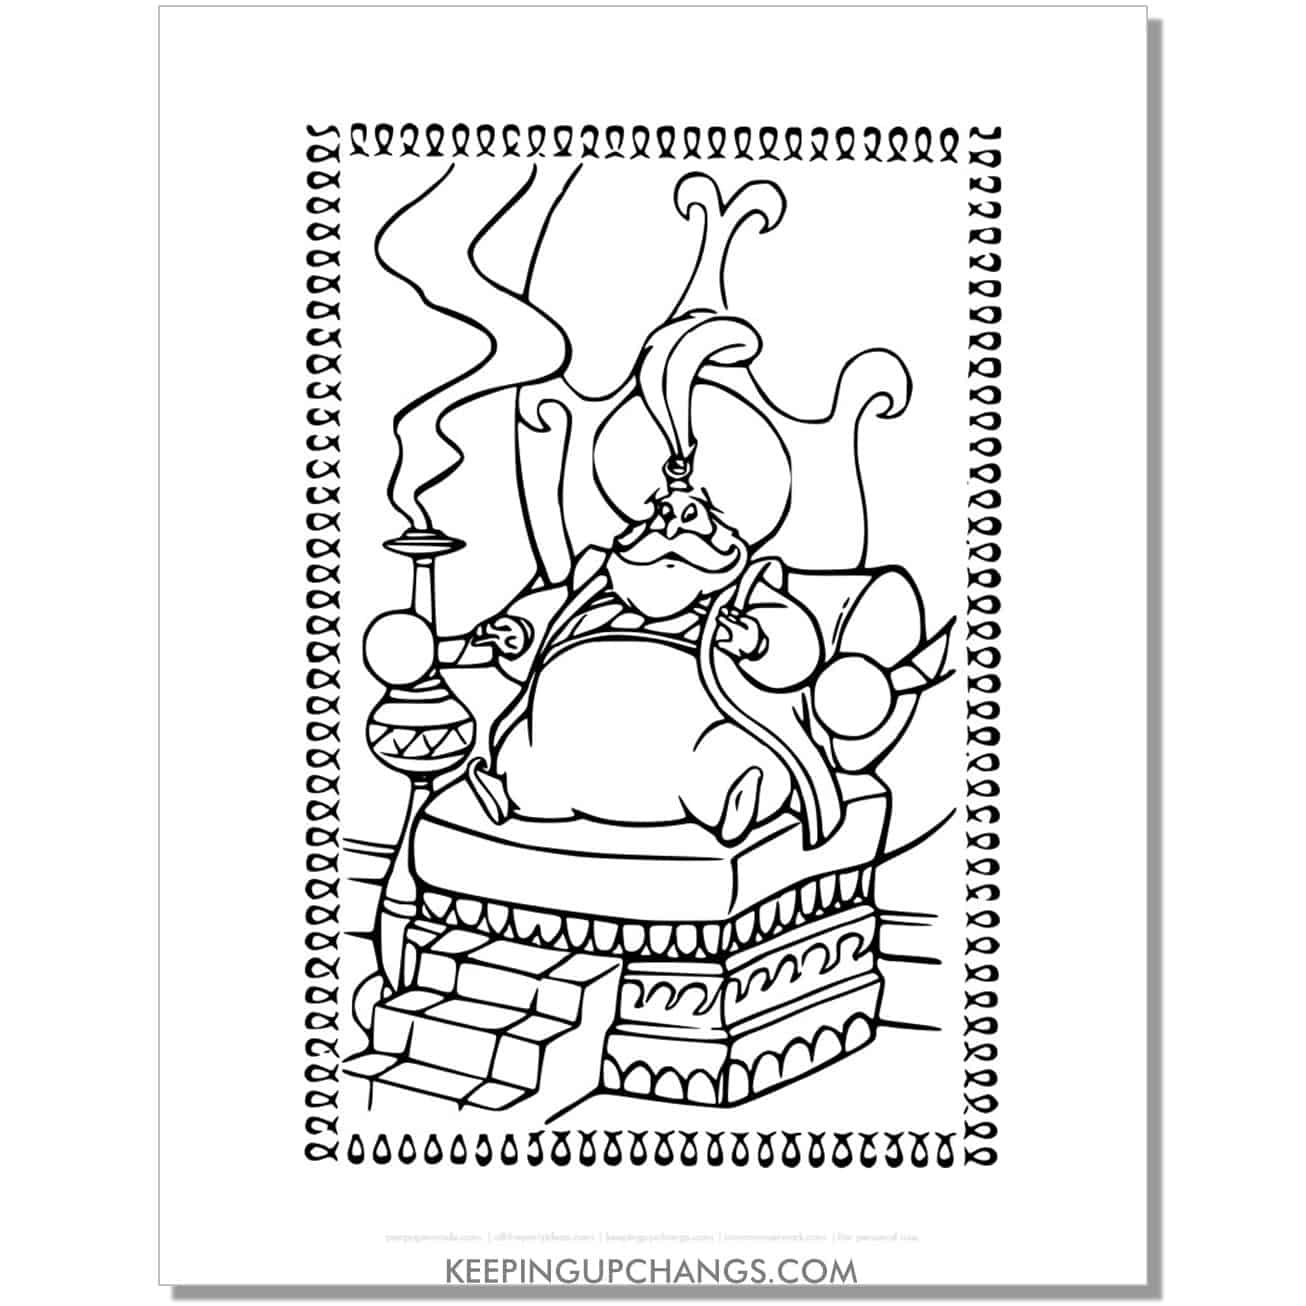 aladdin sultan on throne coloring page, sheet.